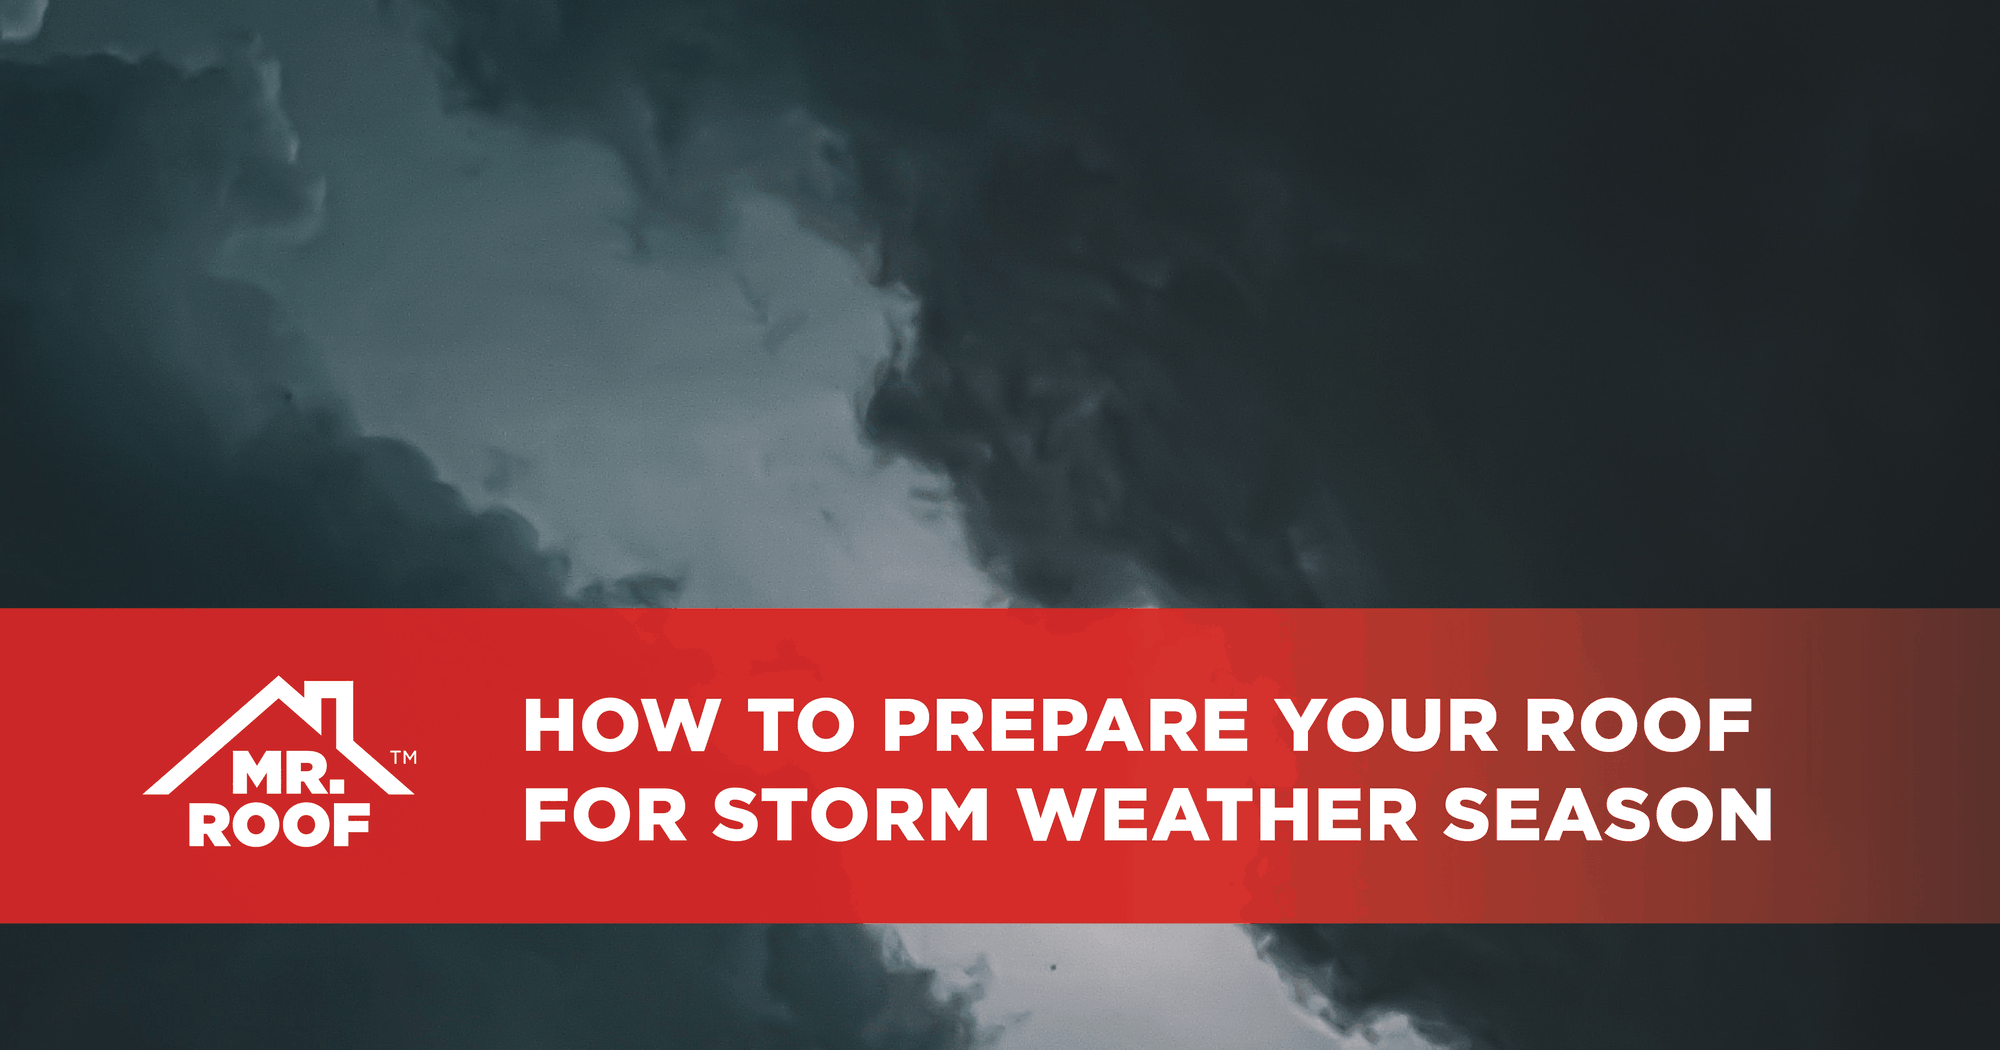 How to prepare your home for storm weather season